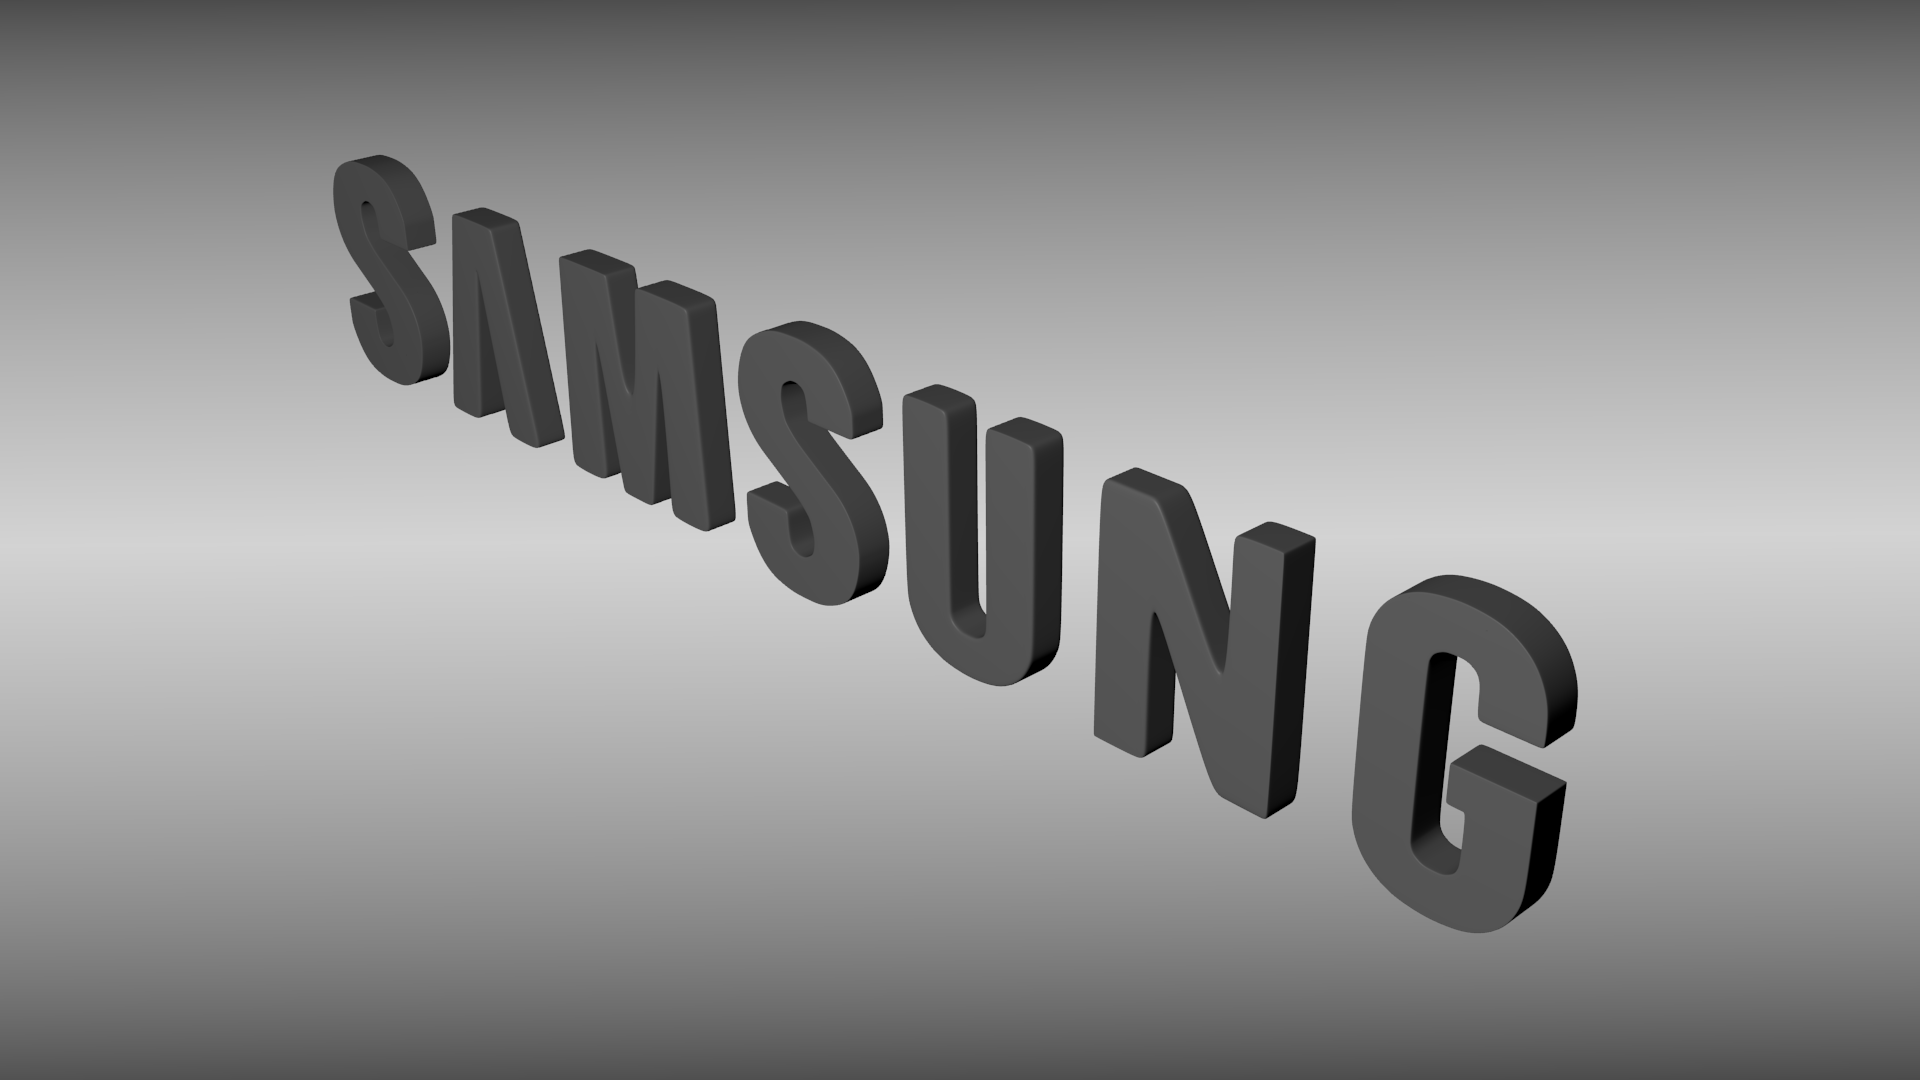 Samsung Electronics America To Acquire Dacor As Part Of Home Appliance Portfolio